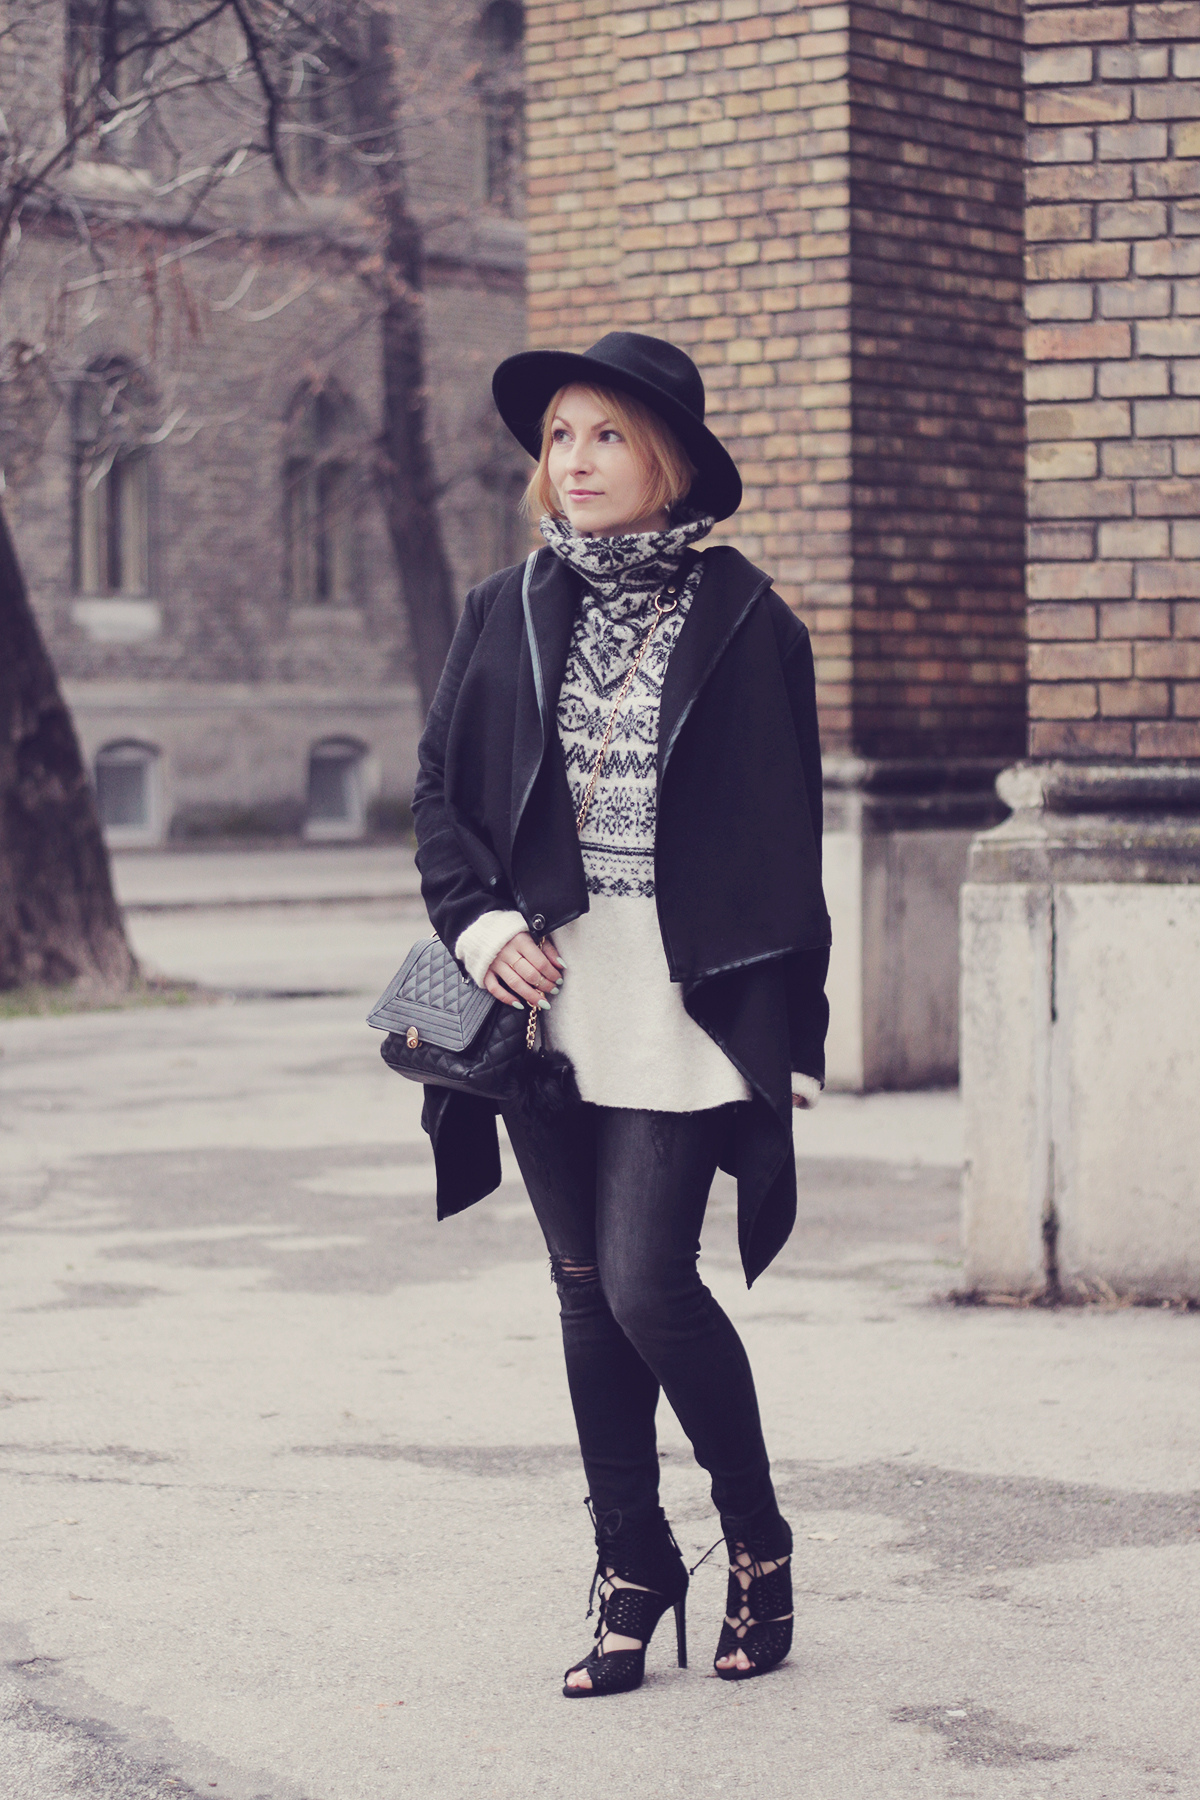 christmas winter jumper with heels and black hat